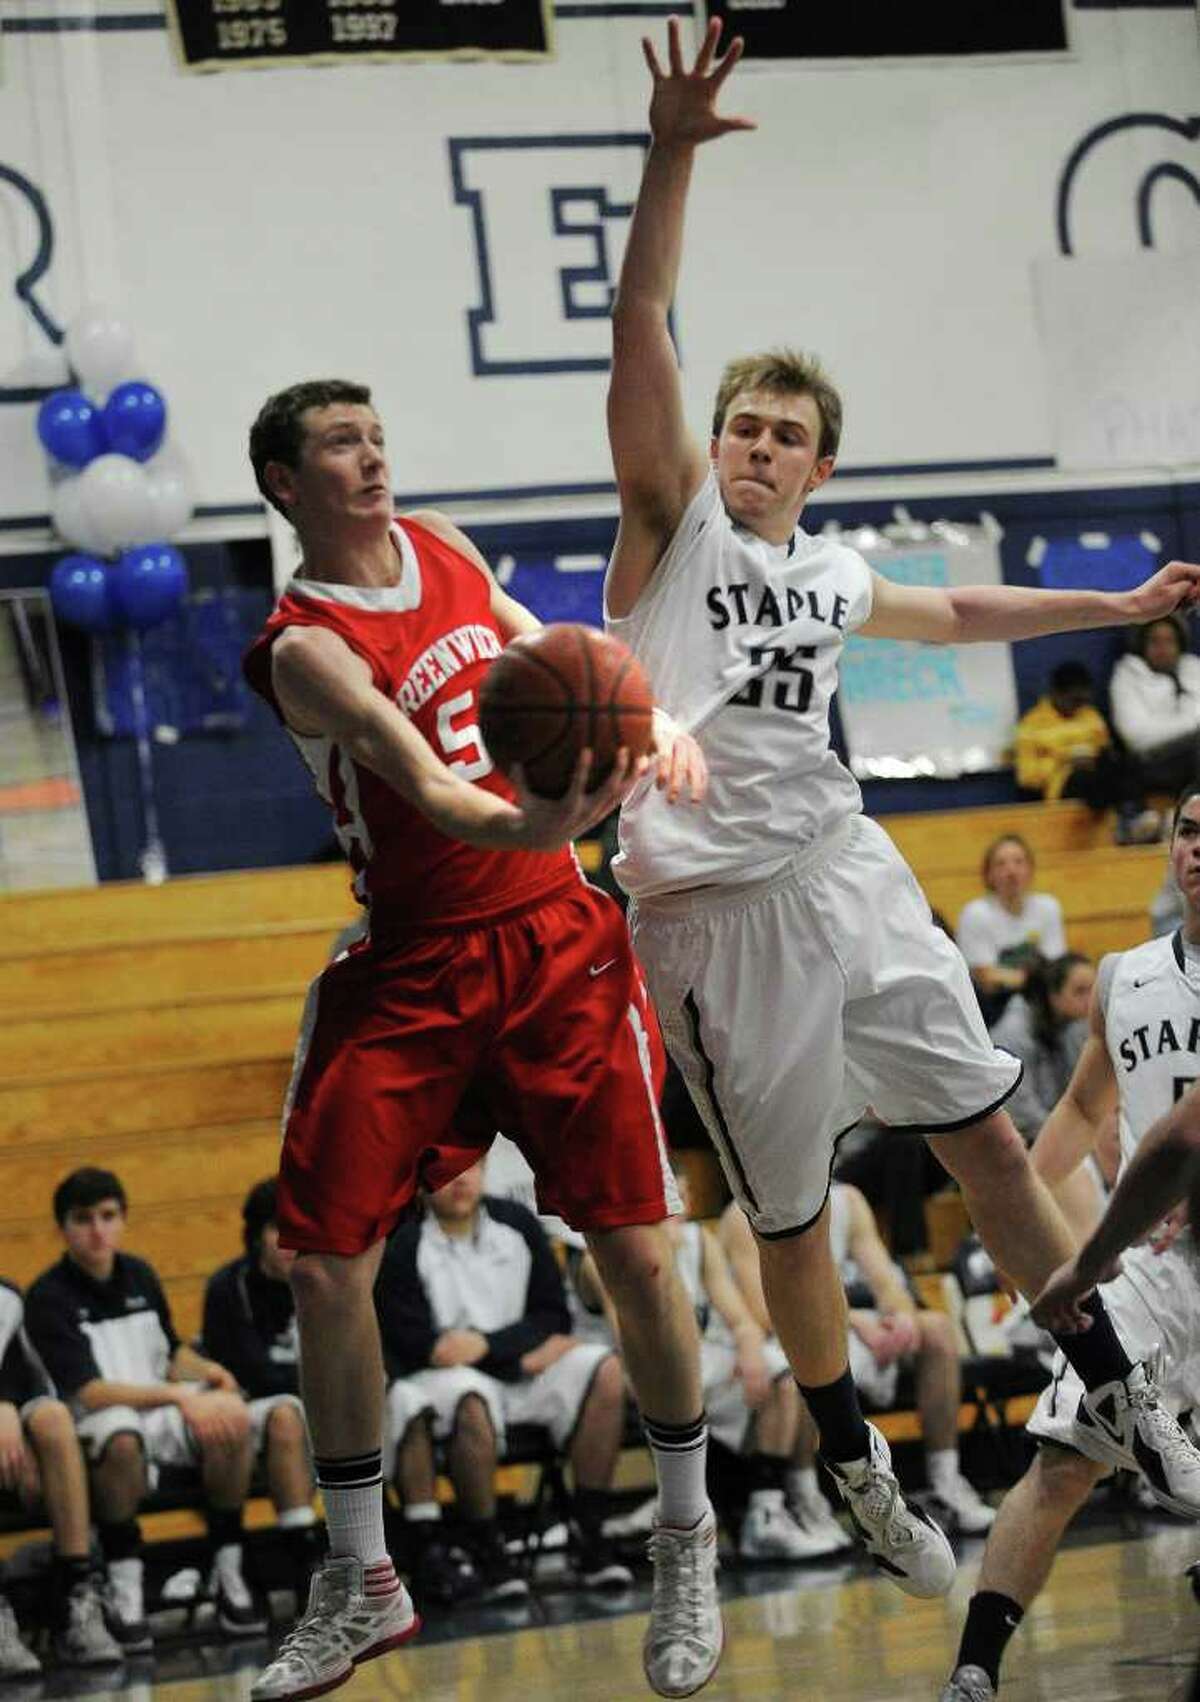 Greenwich's Jonathan Palmer attempts a finger roll in front of Staples defender Michael Argosh during their FCIAC matchup at Staples High School in Westport on Monday, February 13, 2012.